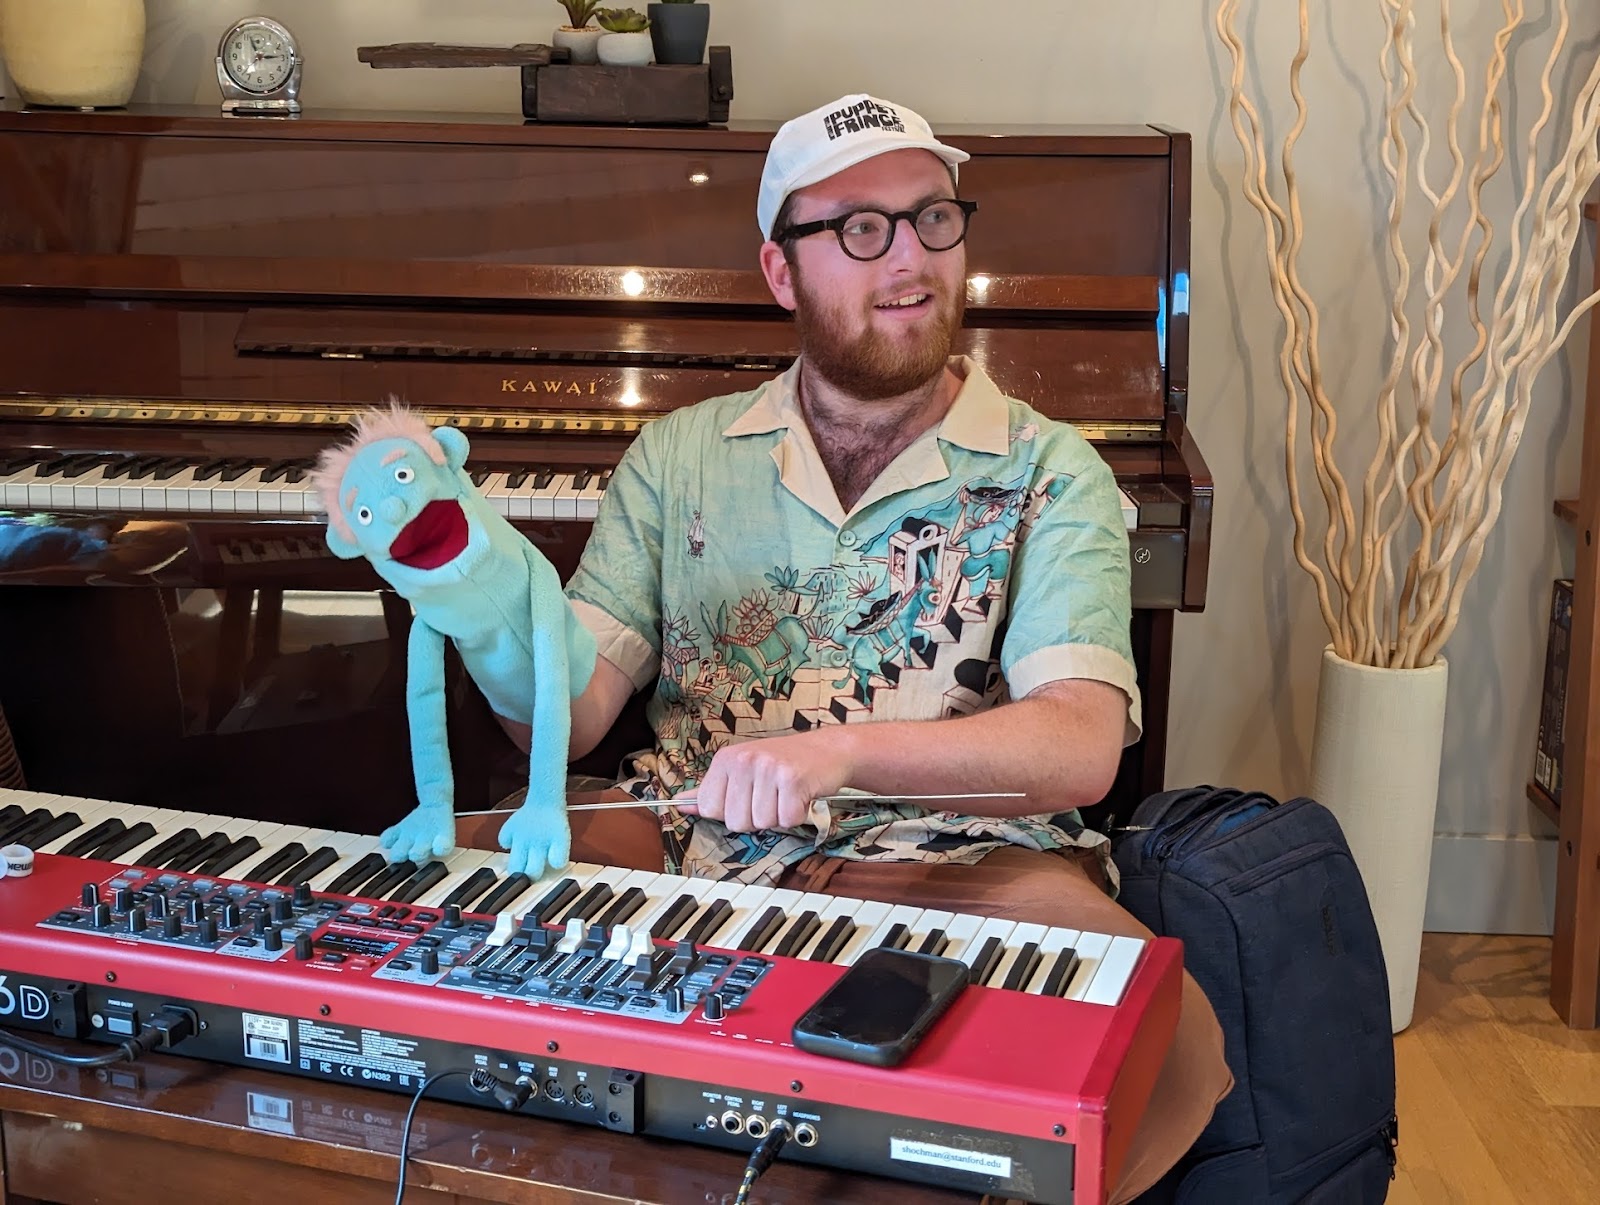 A photo of a person in front of the keyboard with a puppet in one hand.